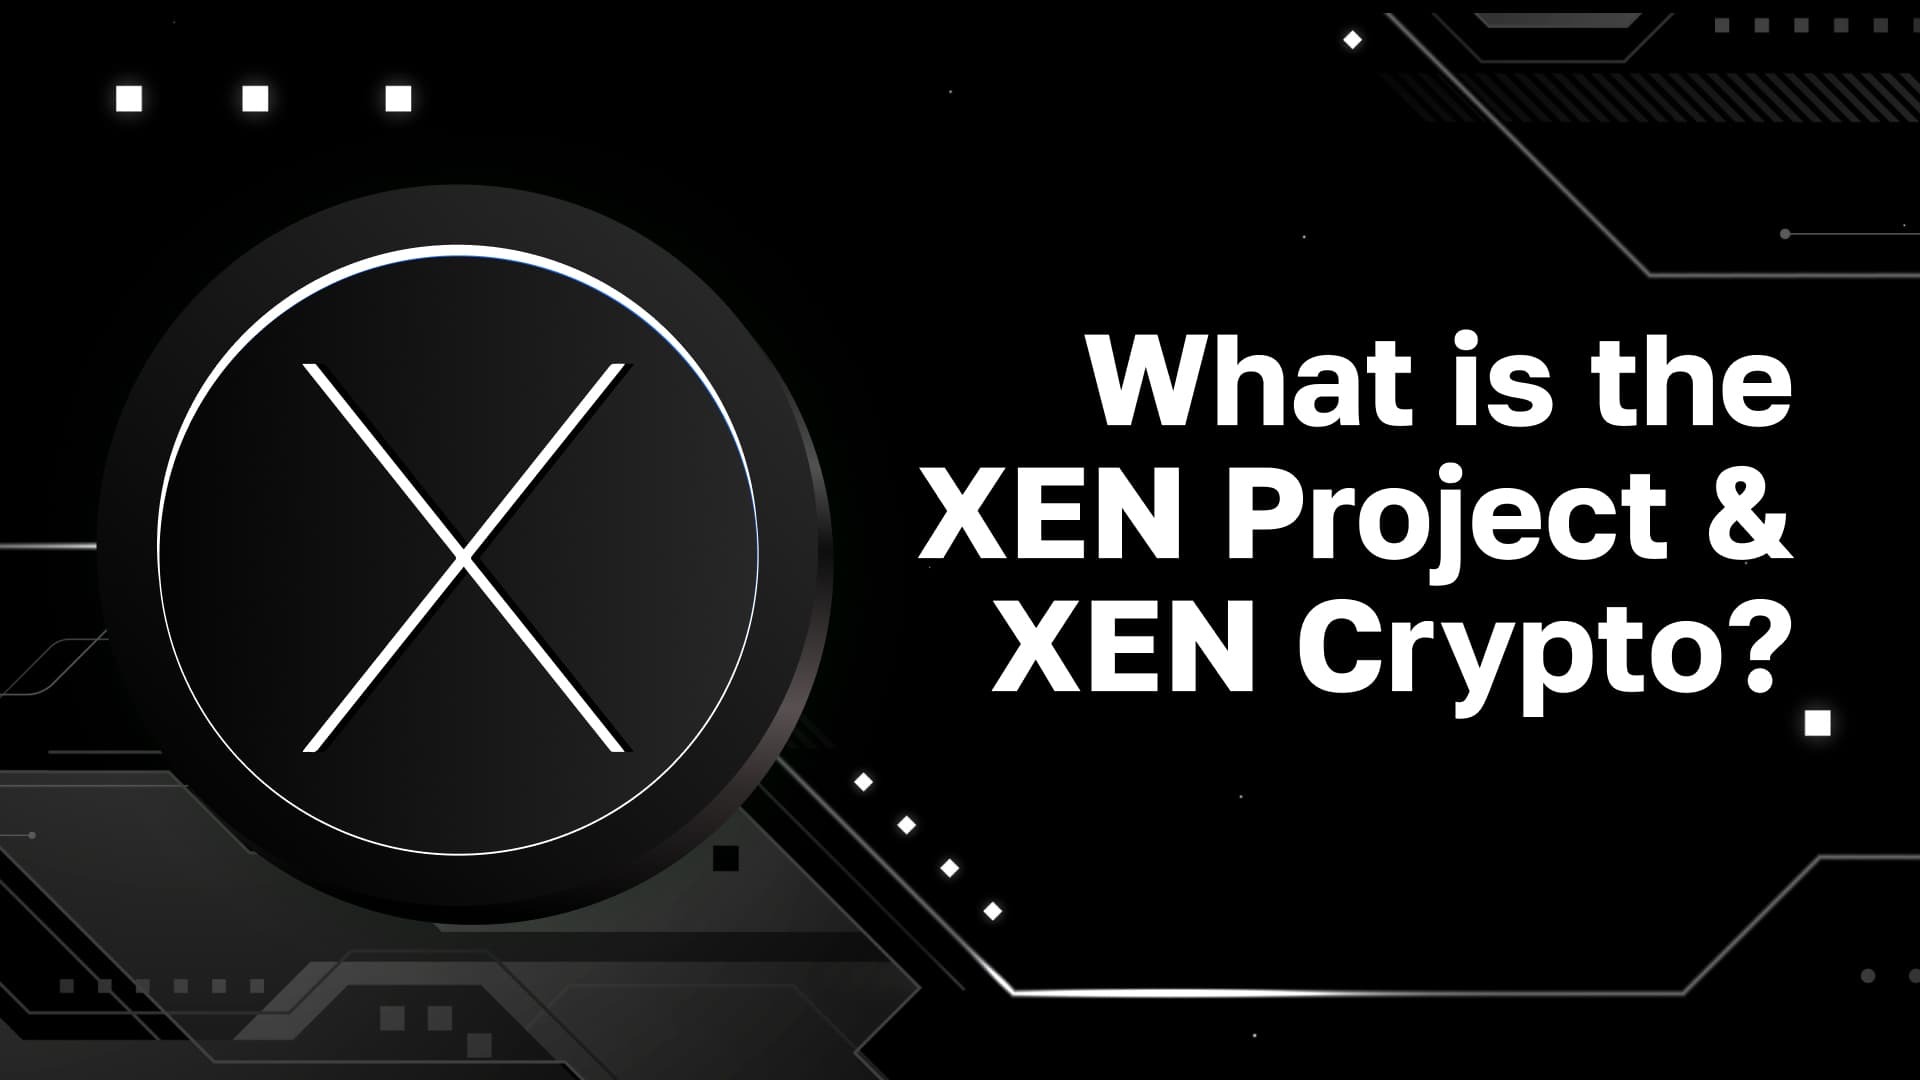 What is the XEN Project and XEN Crypto?